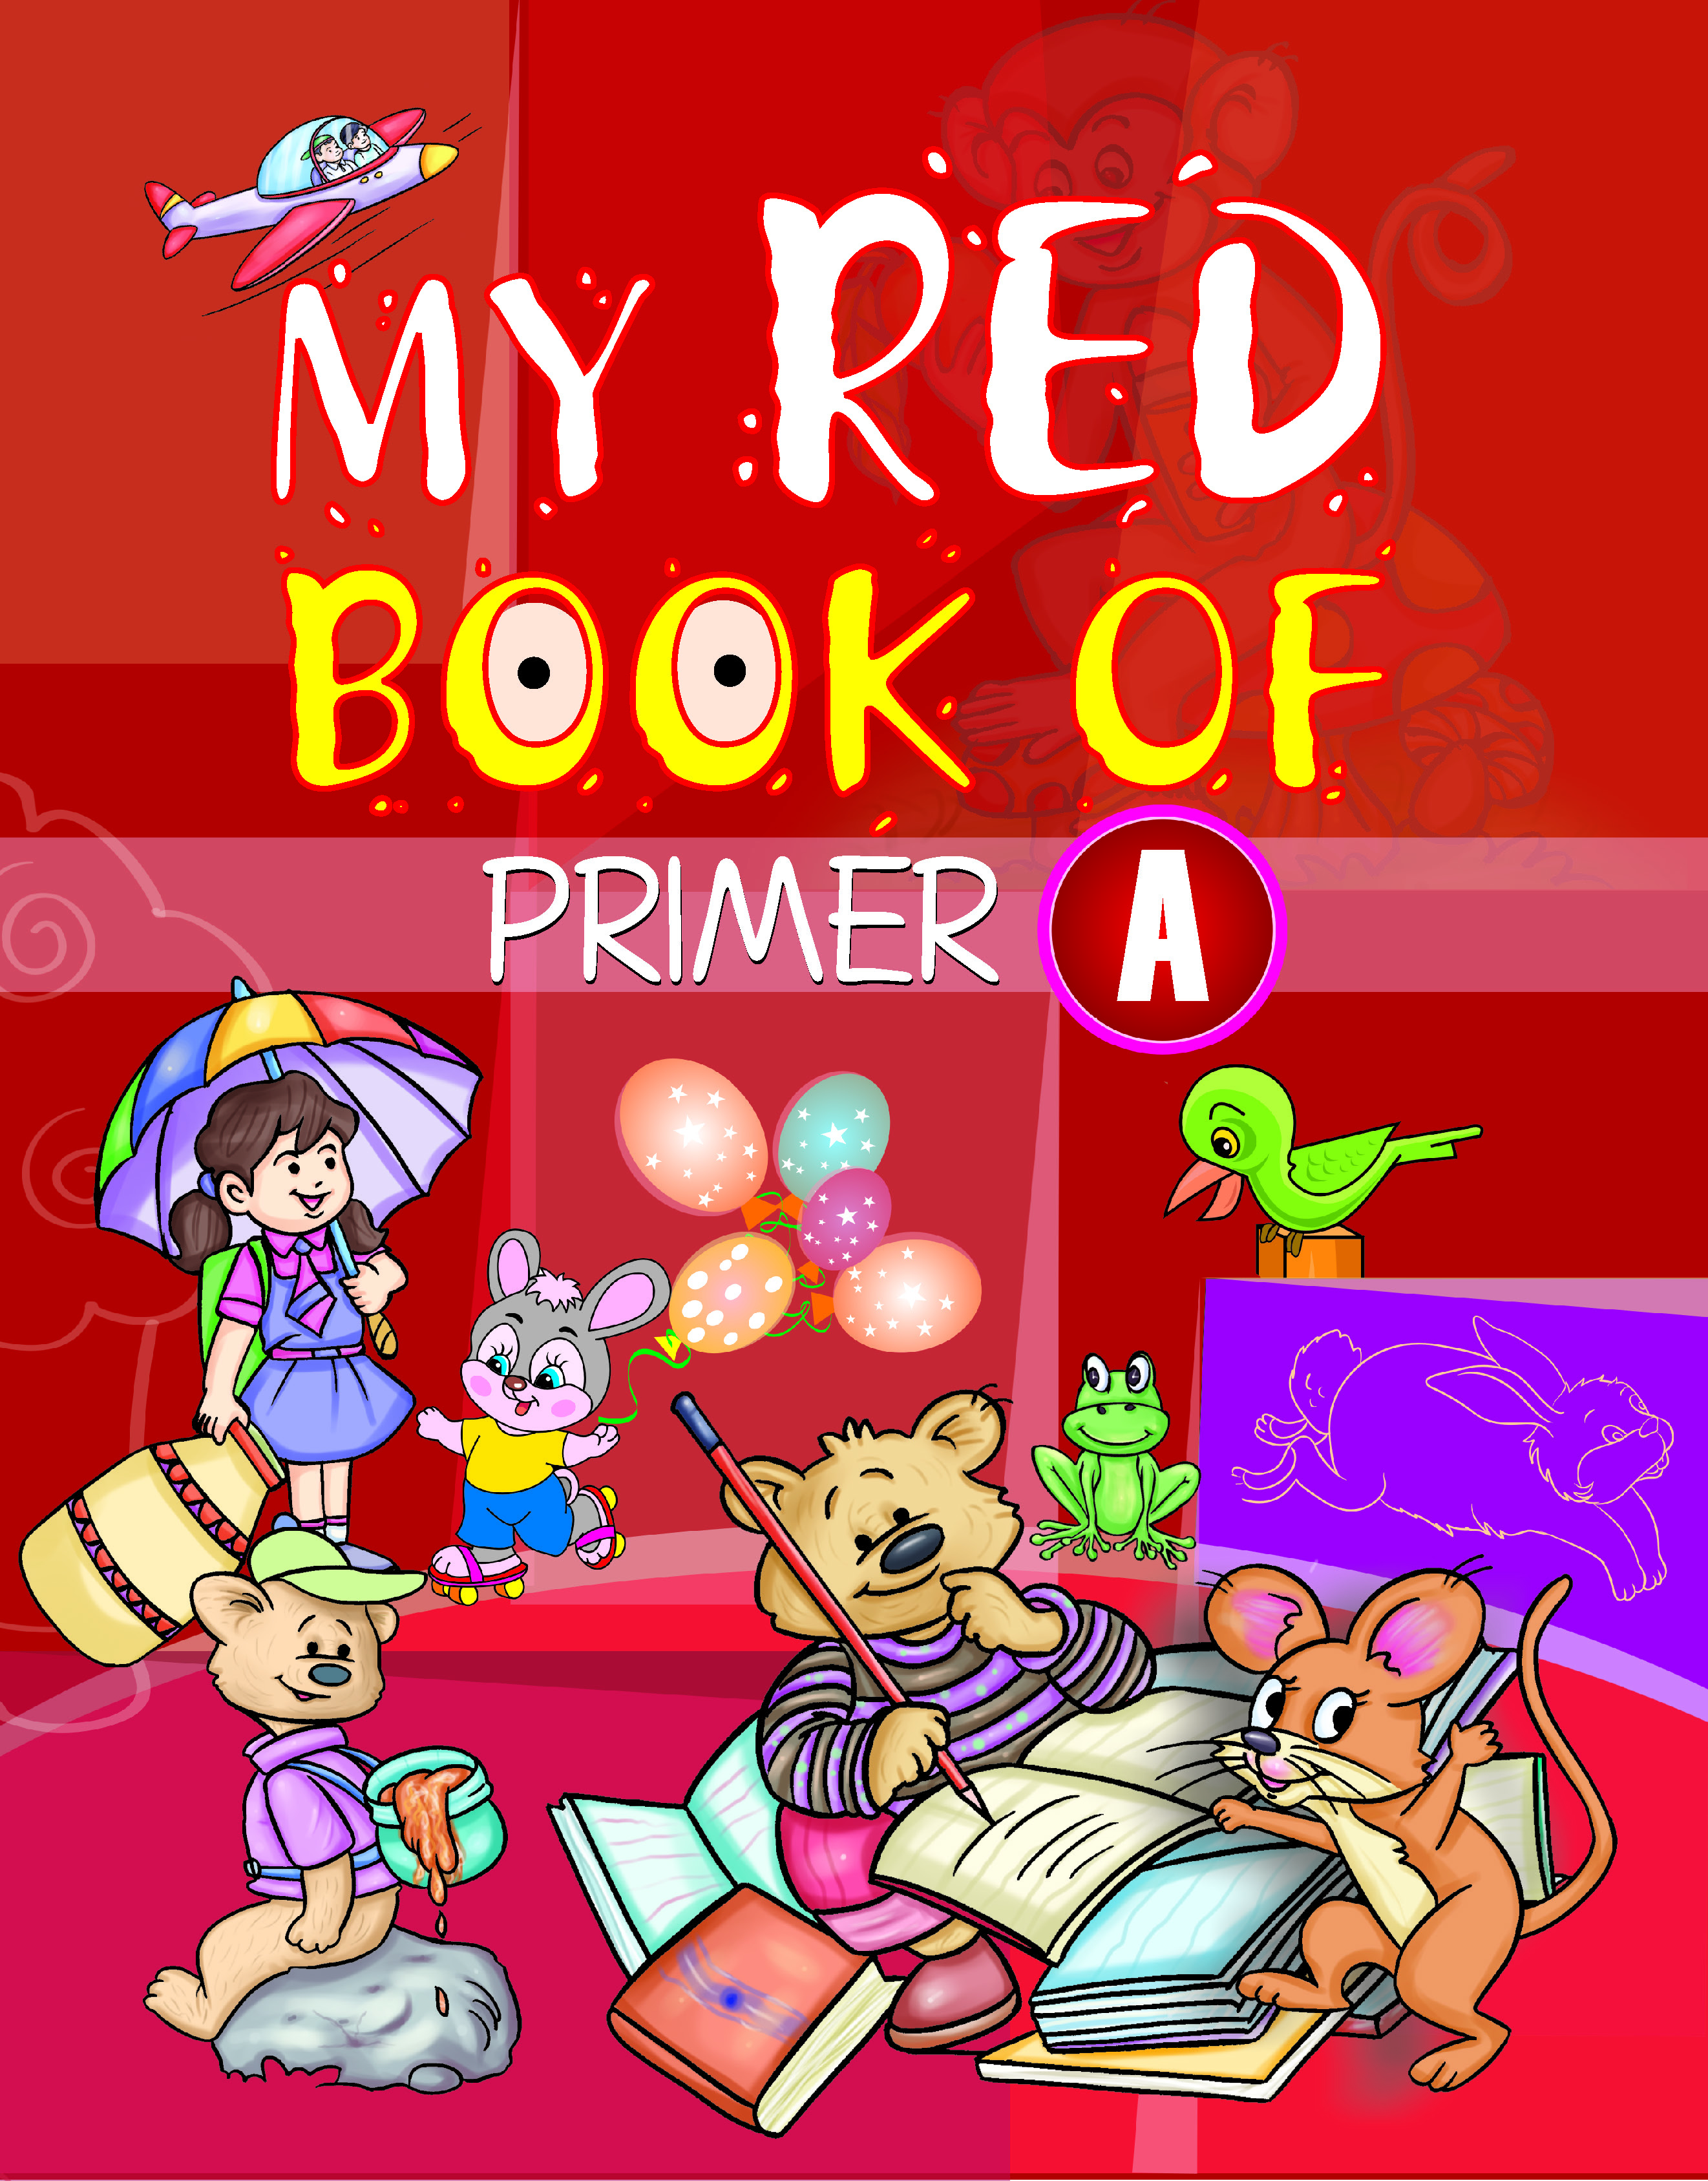 MY RED BOOK OF PRIMER A